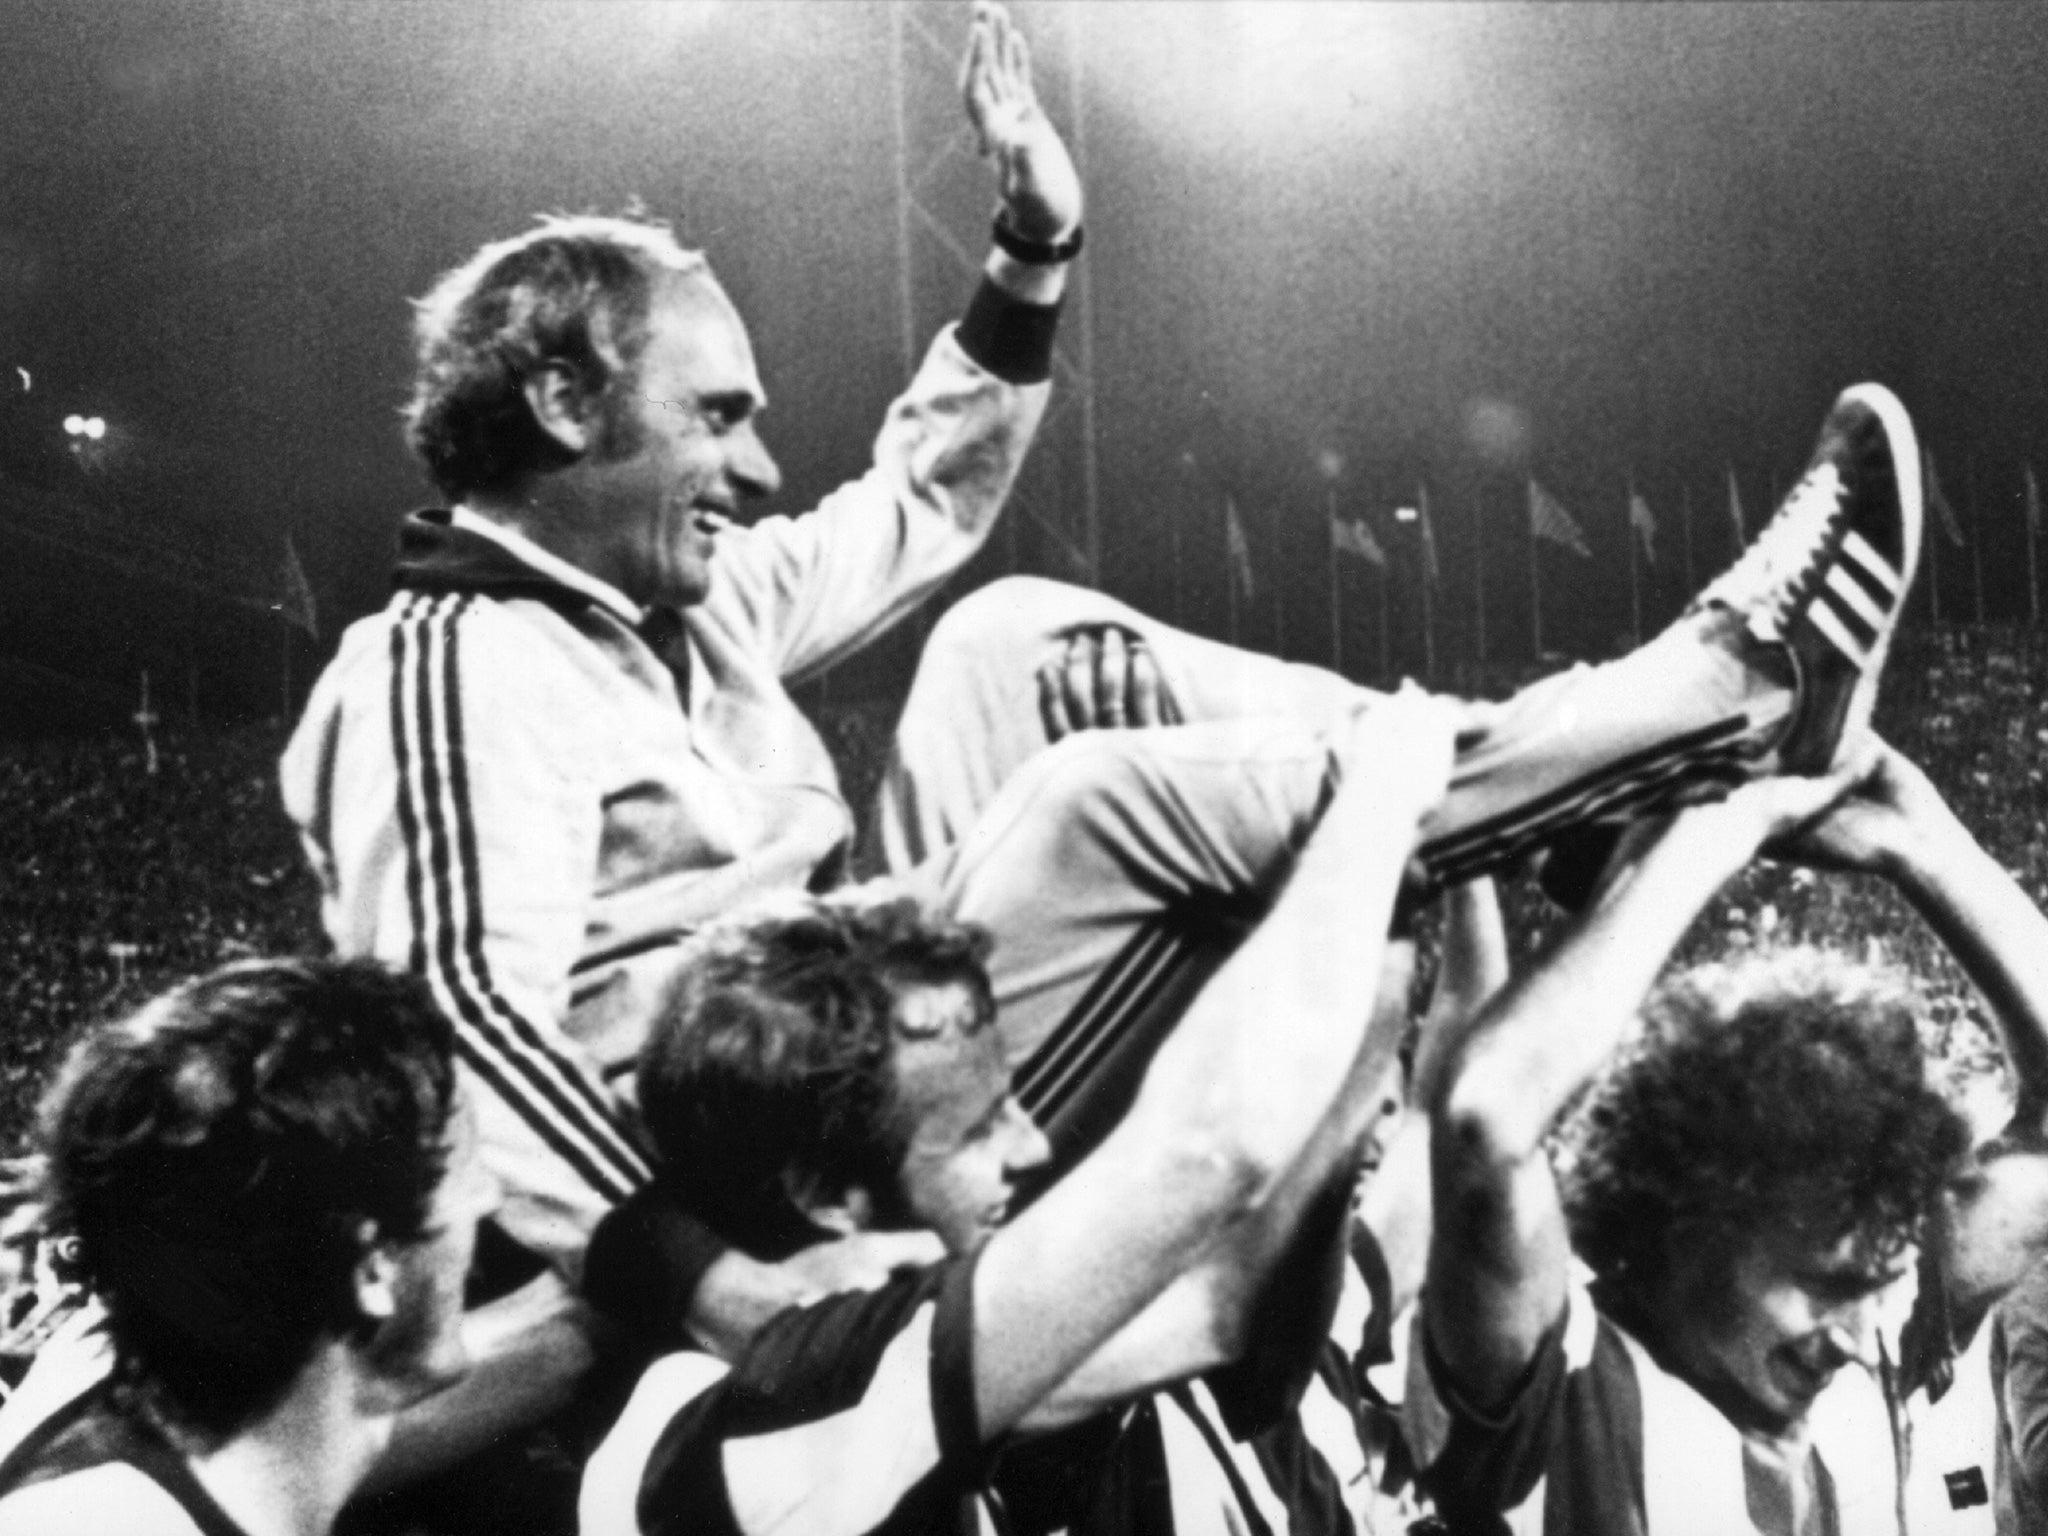 Lattek is carried off the pitch by his players in 1972 after Bayern Munich had won the Bundesliga title